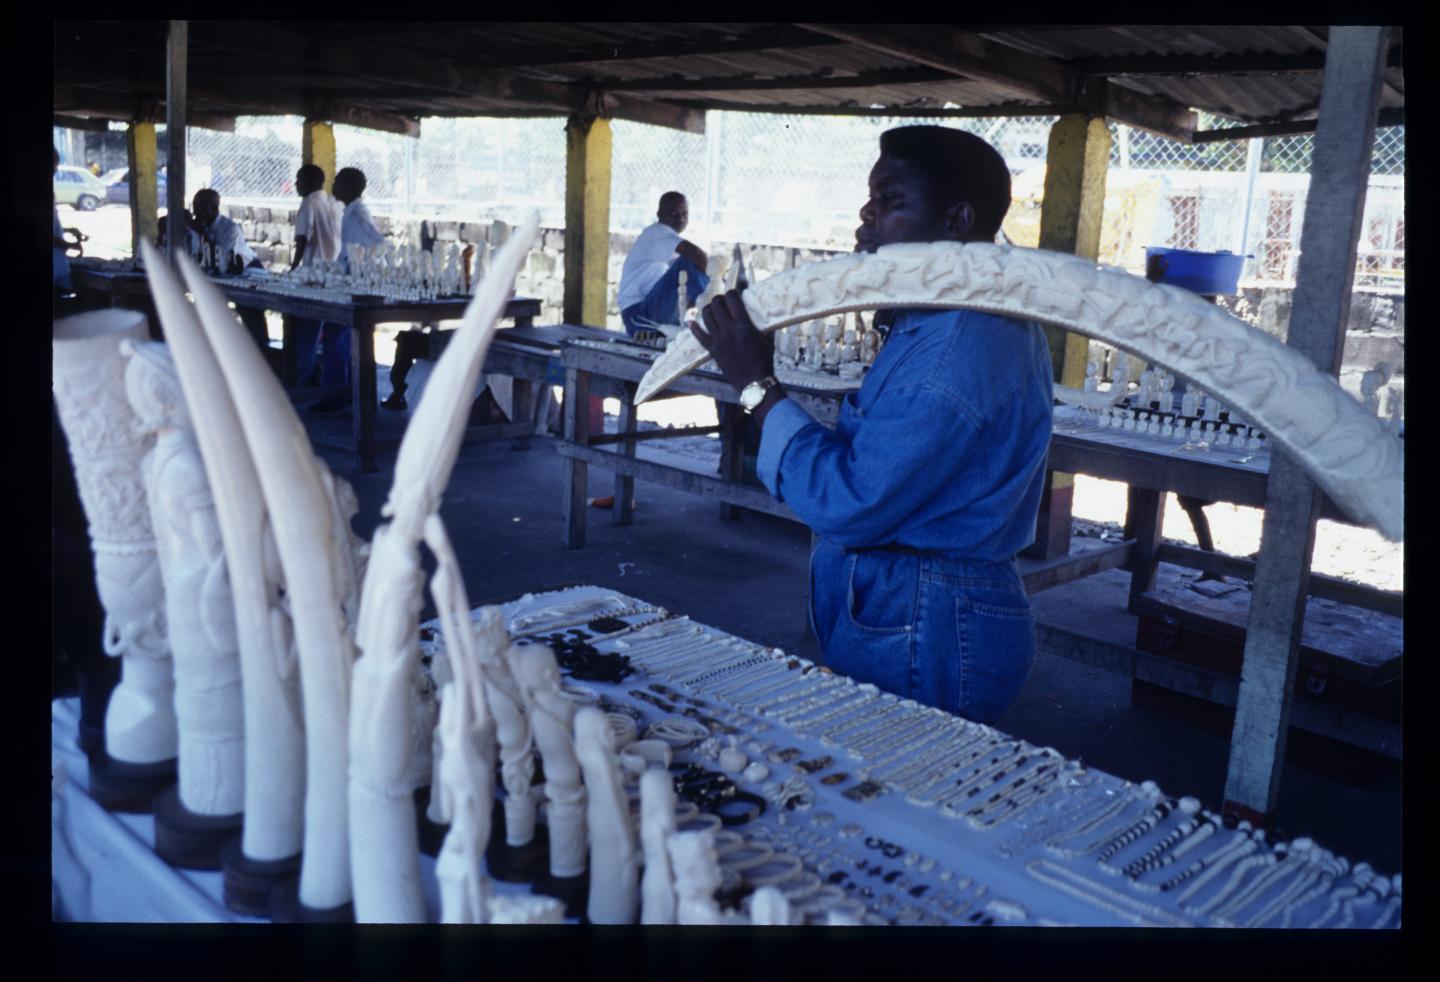 Local Ivory Market, Central Africa